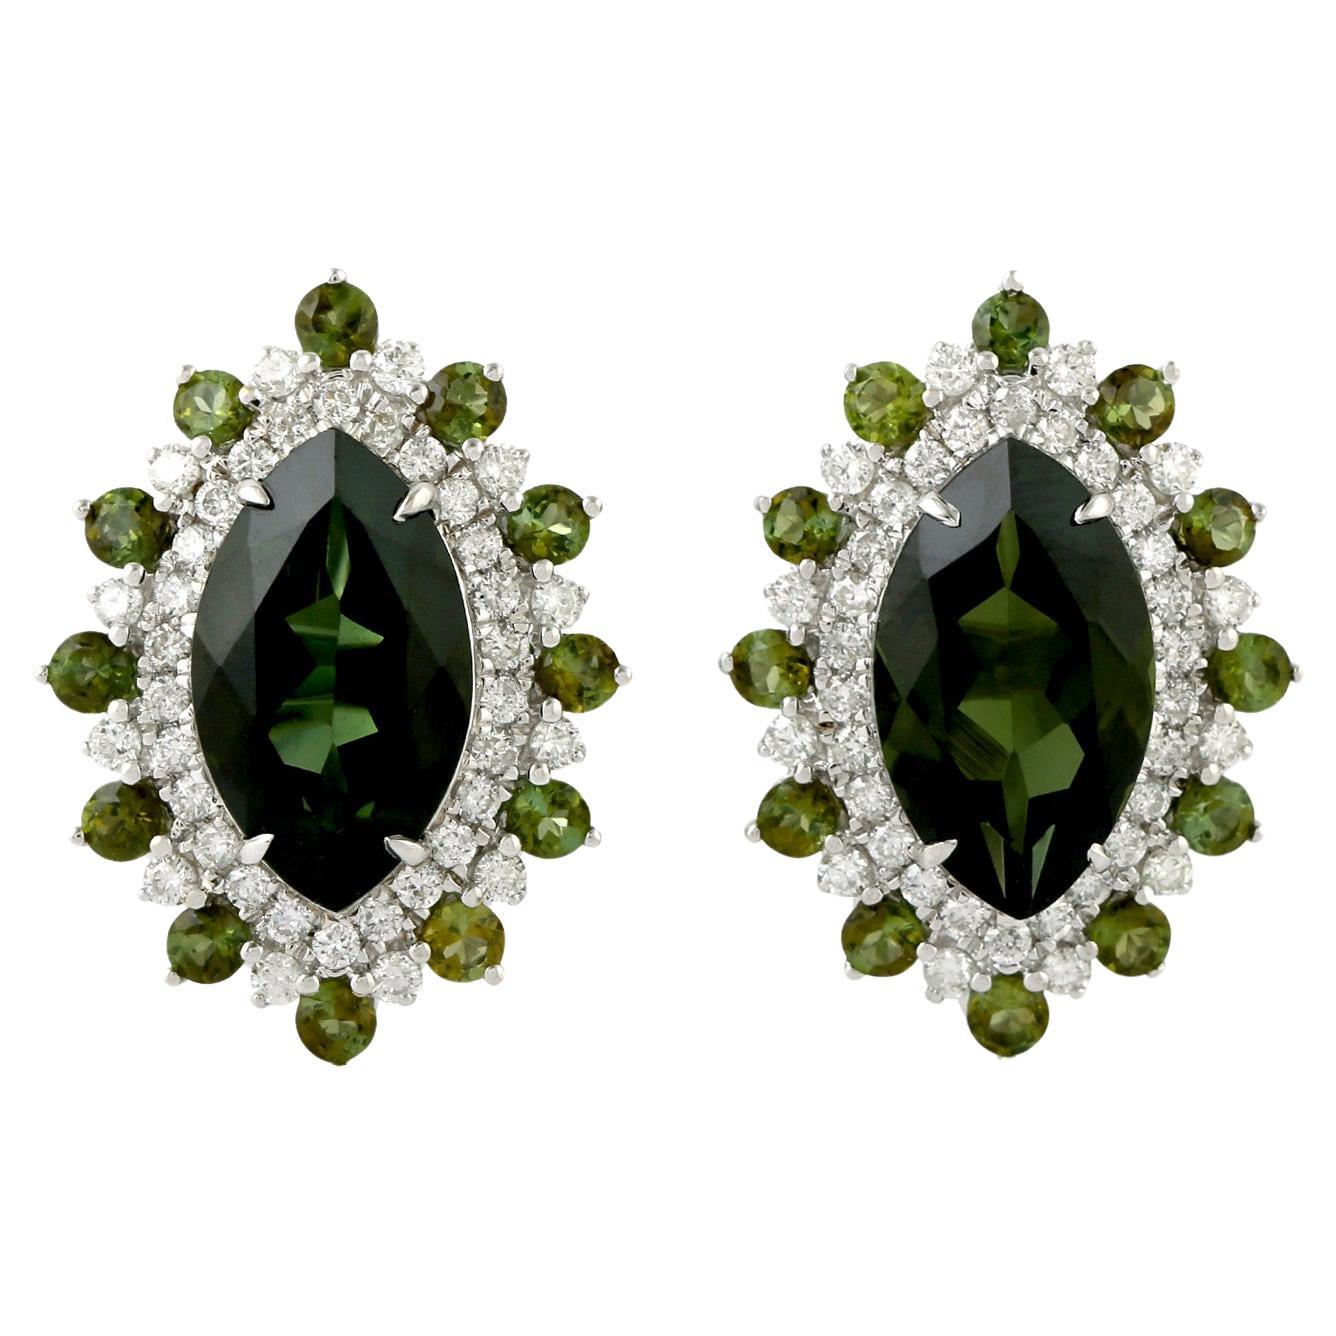 Marquise Shaped Green Tourmaline Studs With Diamonds Made In 18k White Gold